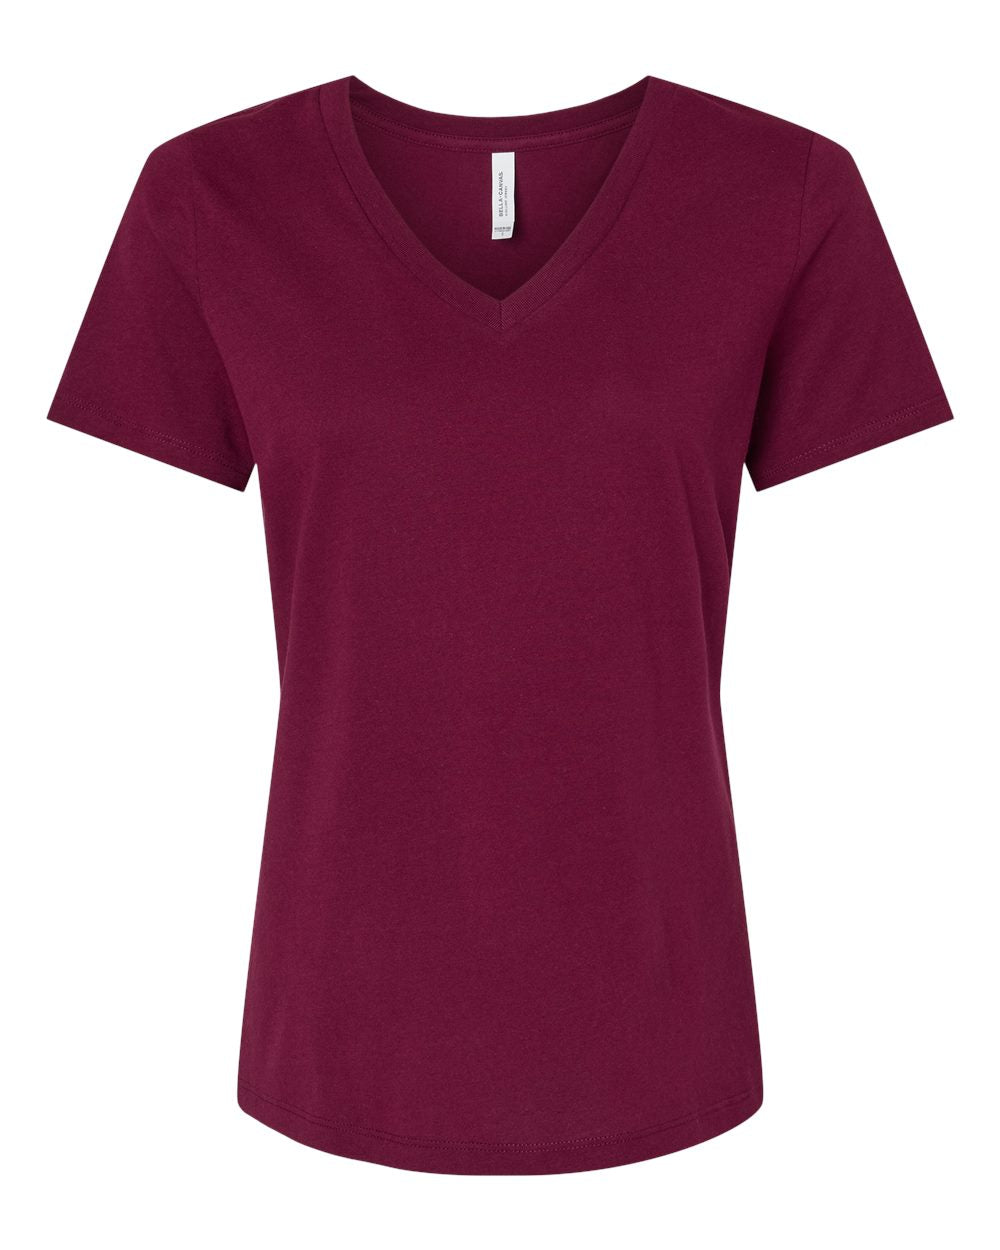 Bella + Canvas Women's Relaxed V-Neck Tee (6405) in Maroon